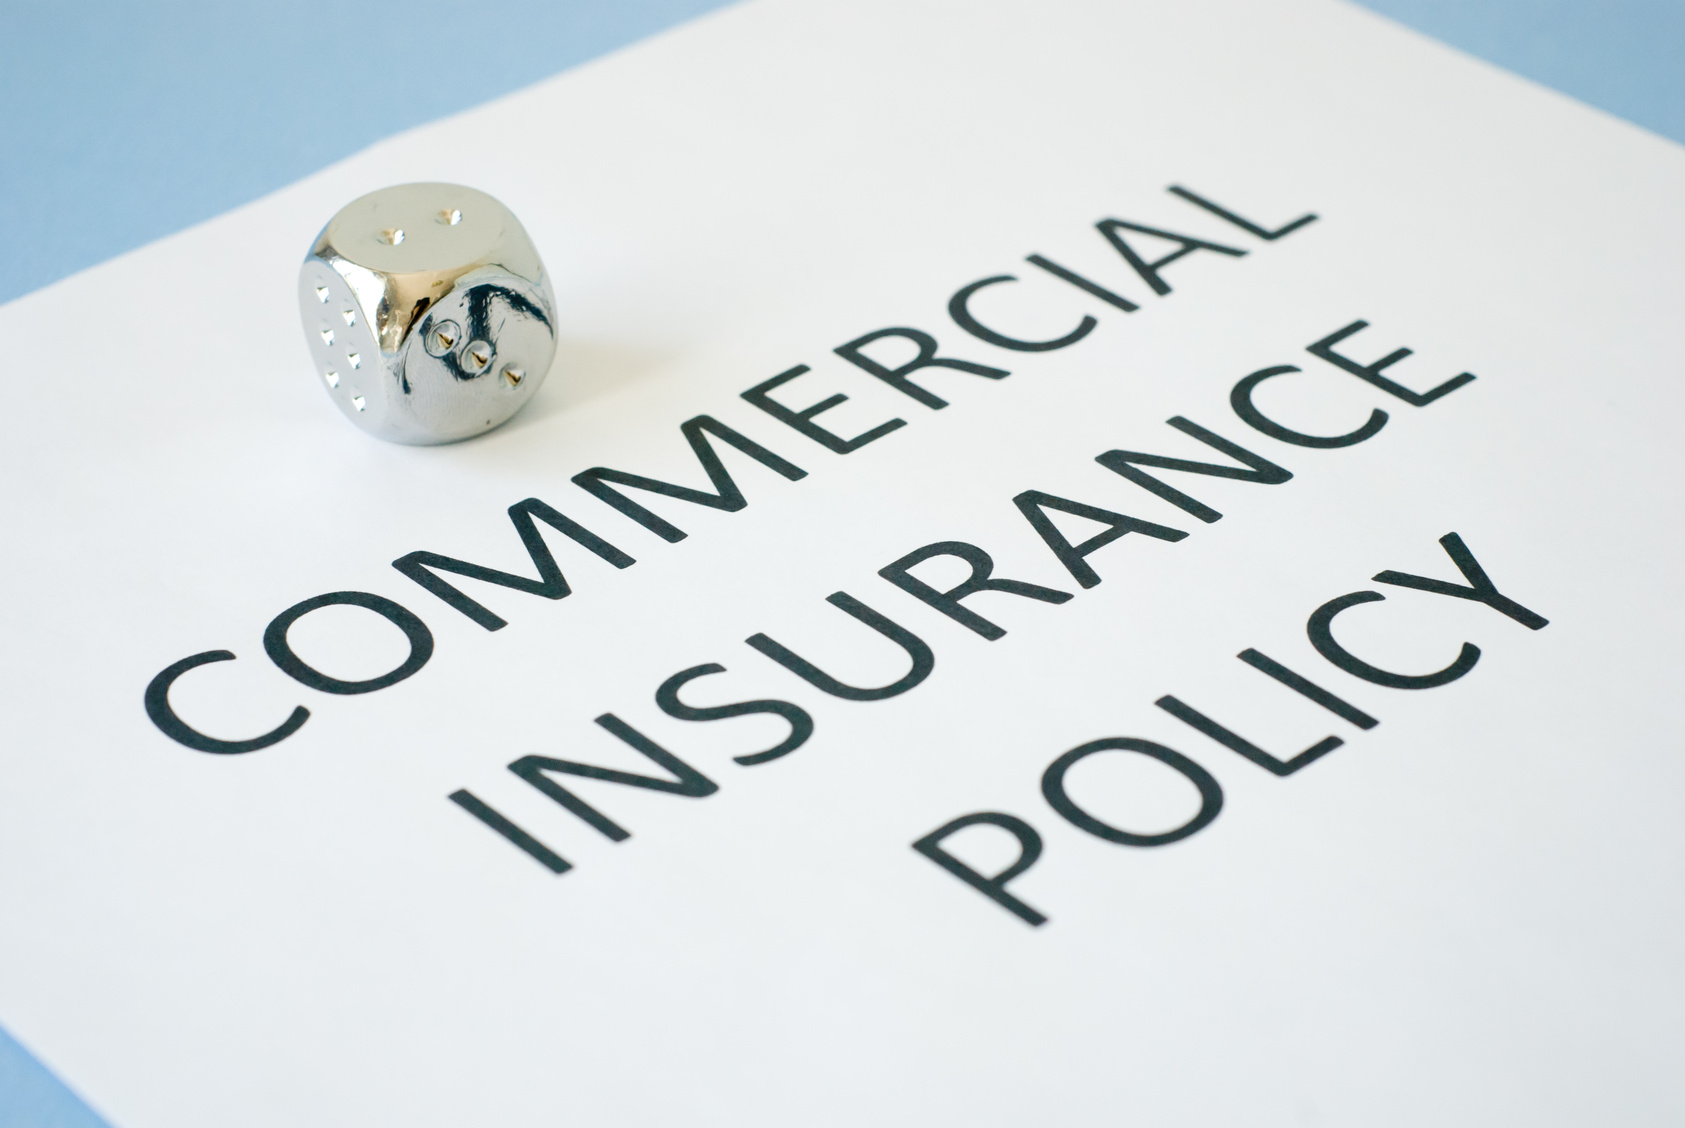 Insurance Mistakes Costing Your Business Money